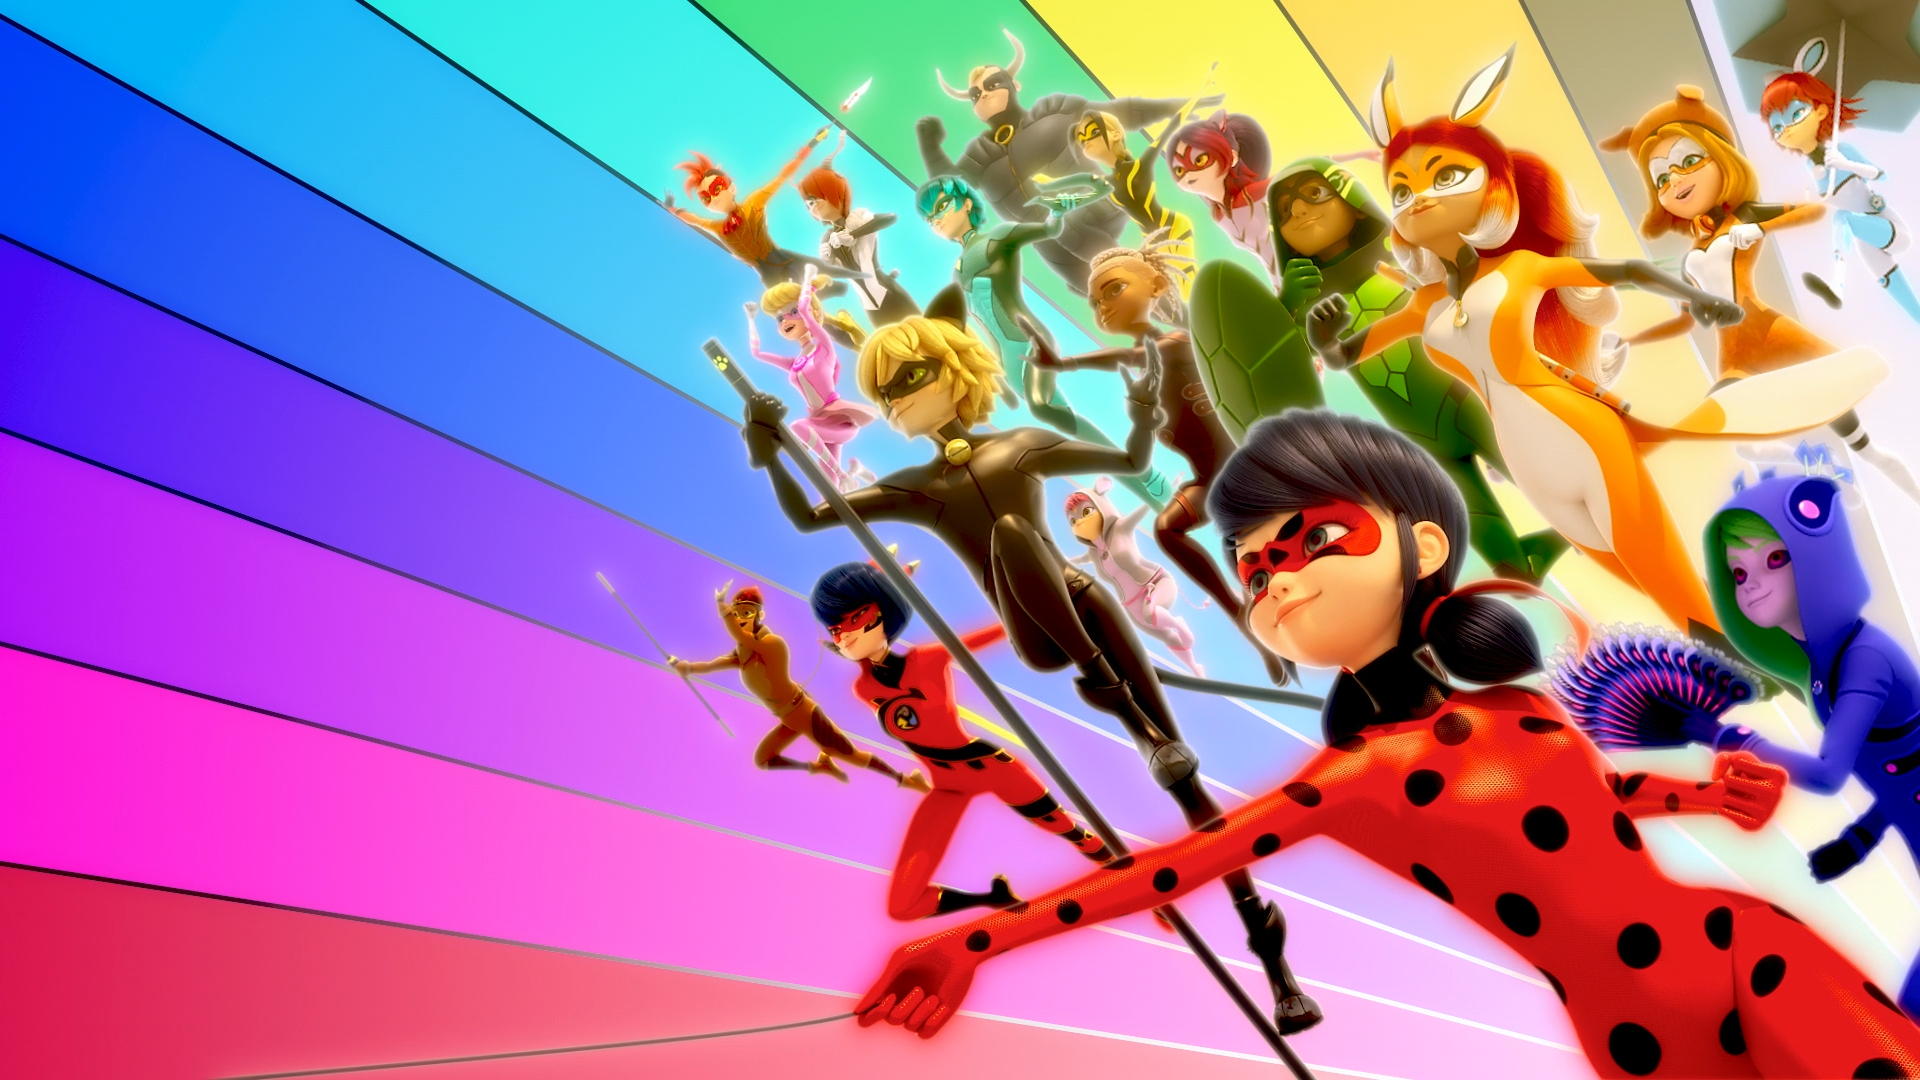 Miraculous Tales Of Ladybug And Cat Noir Giant Peel And Stick Kids